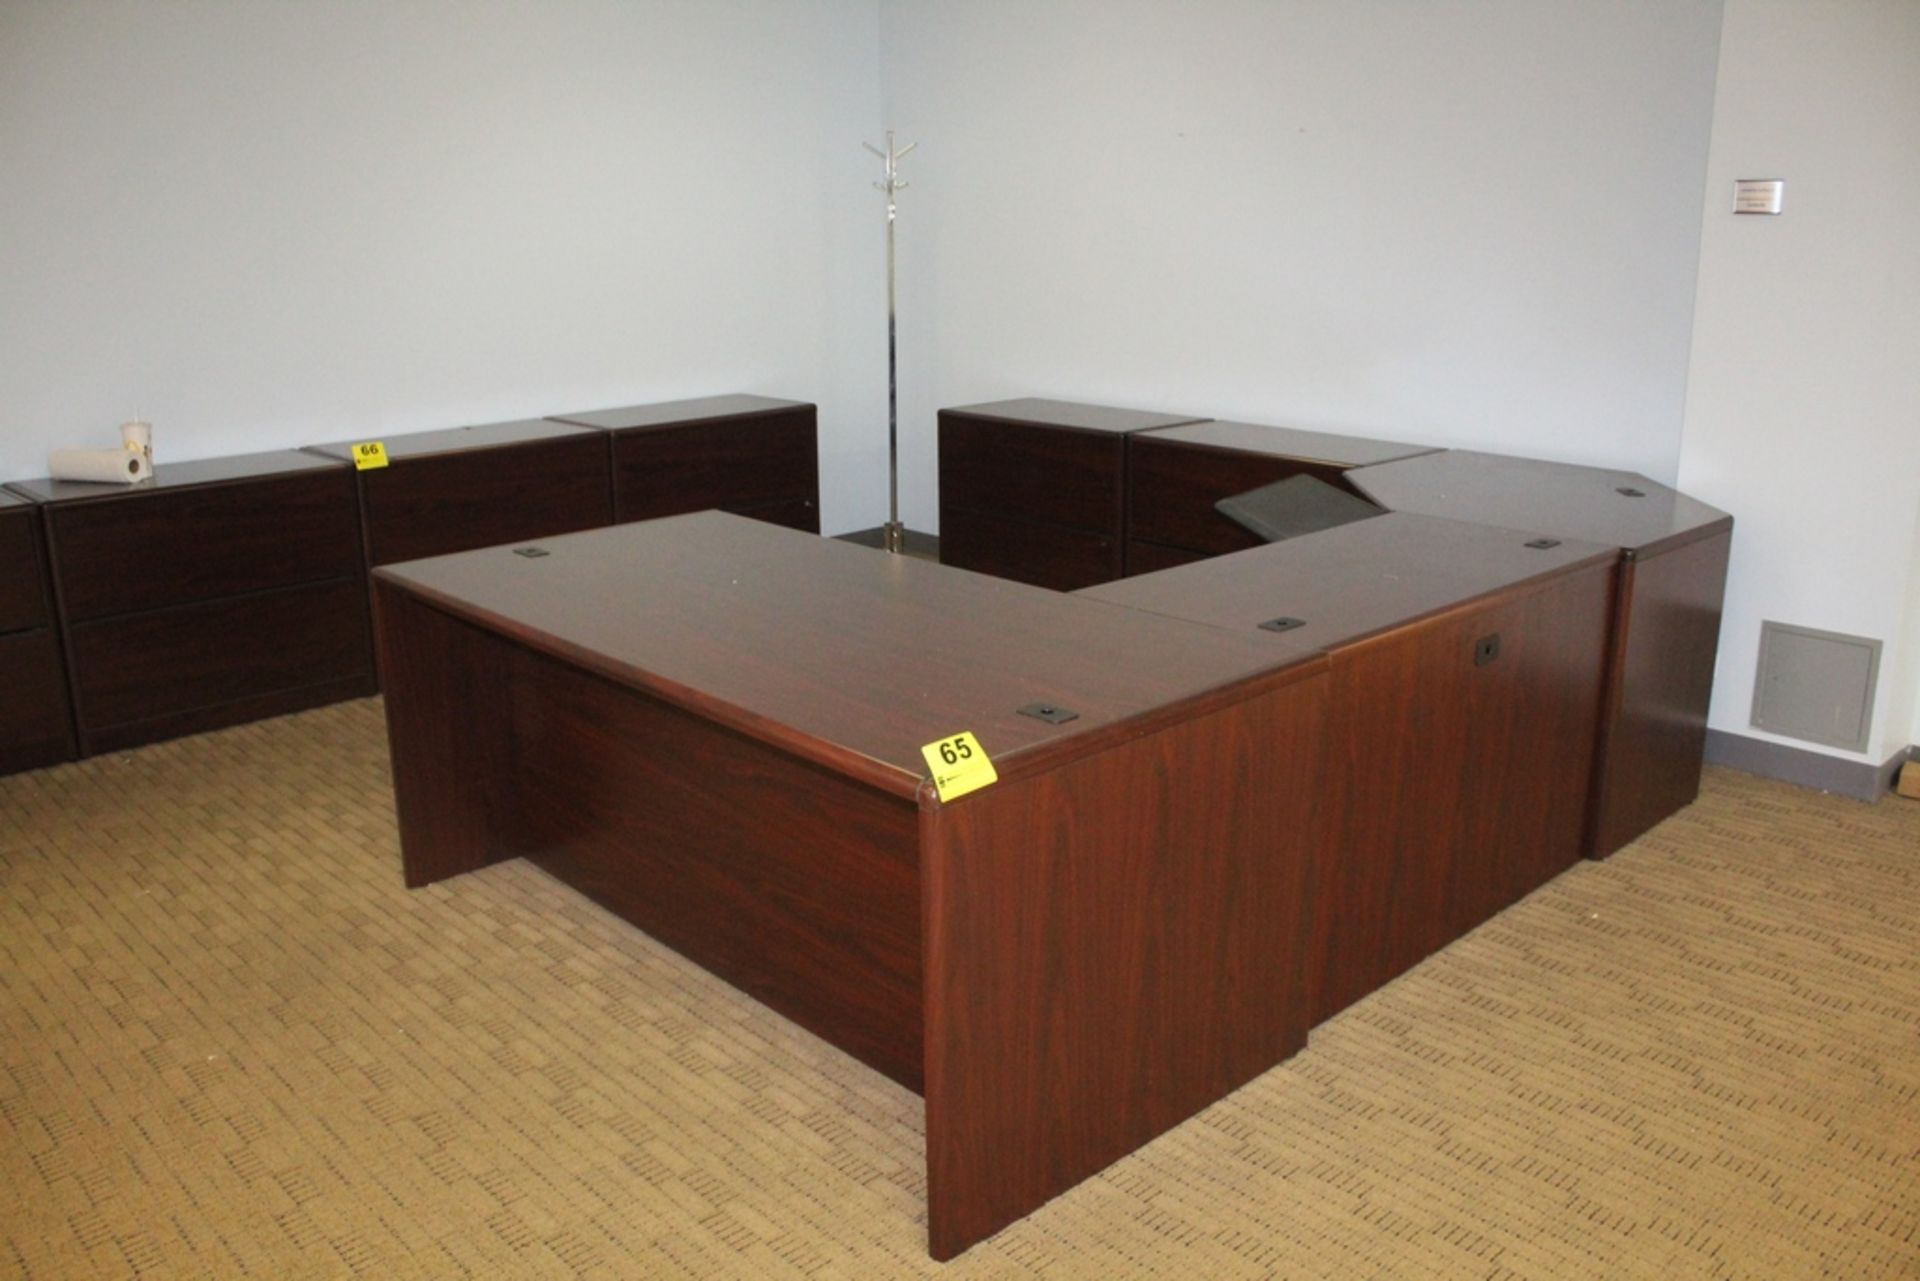 LARGE WOOD U-SHAPED DESK, 124" X 72" WITH TWO WOOD LATERAL FILE CABINETS